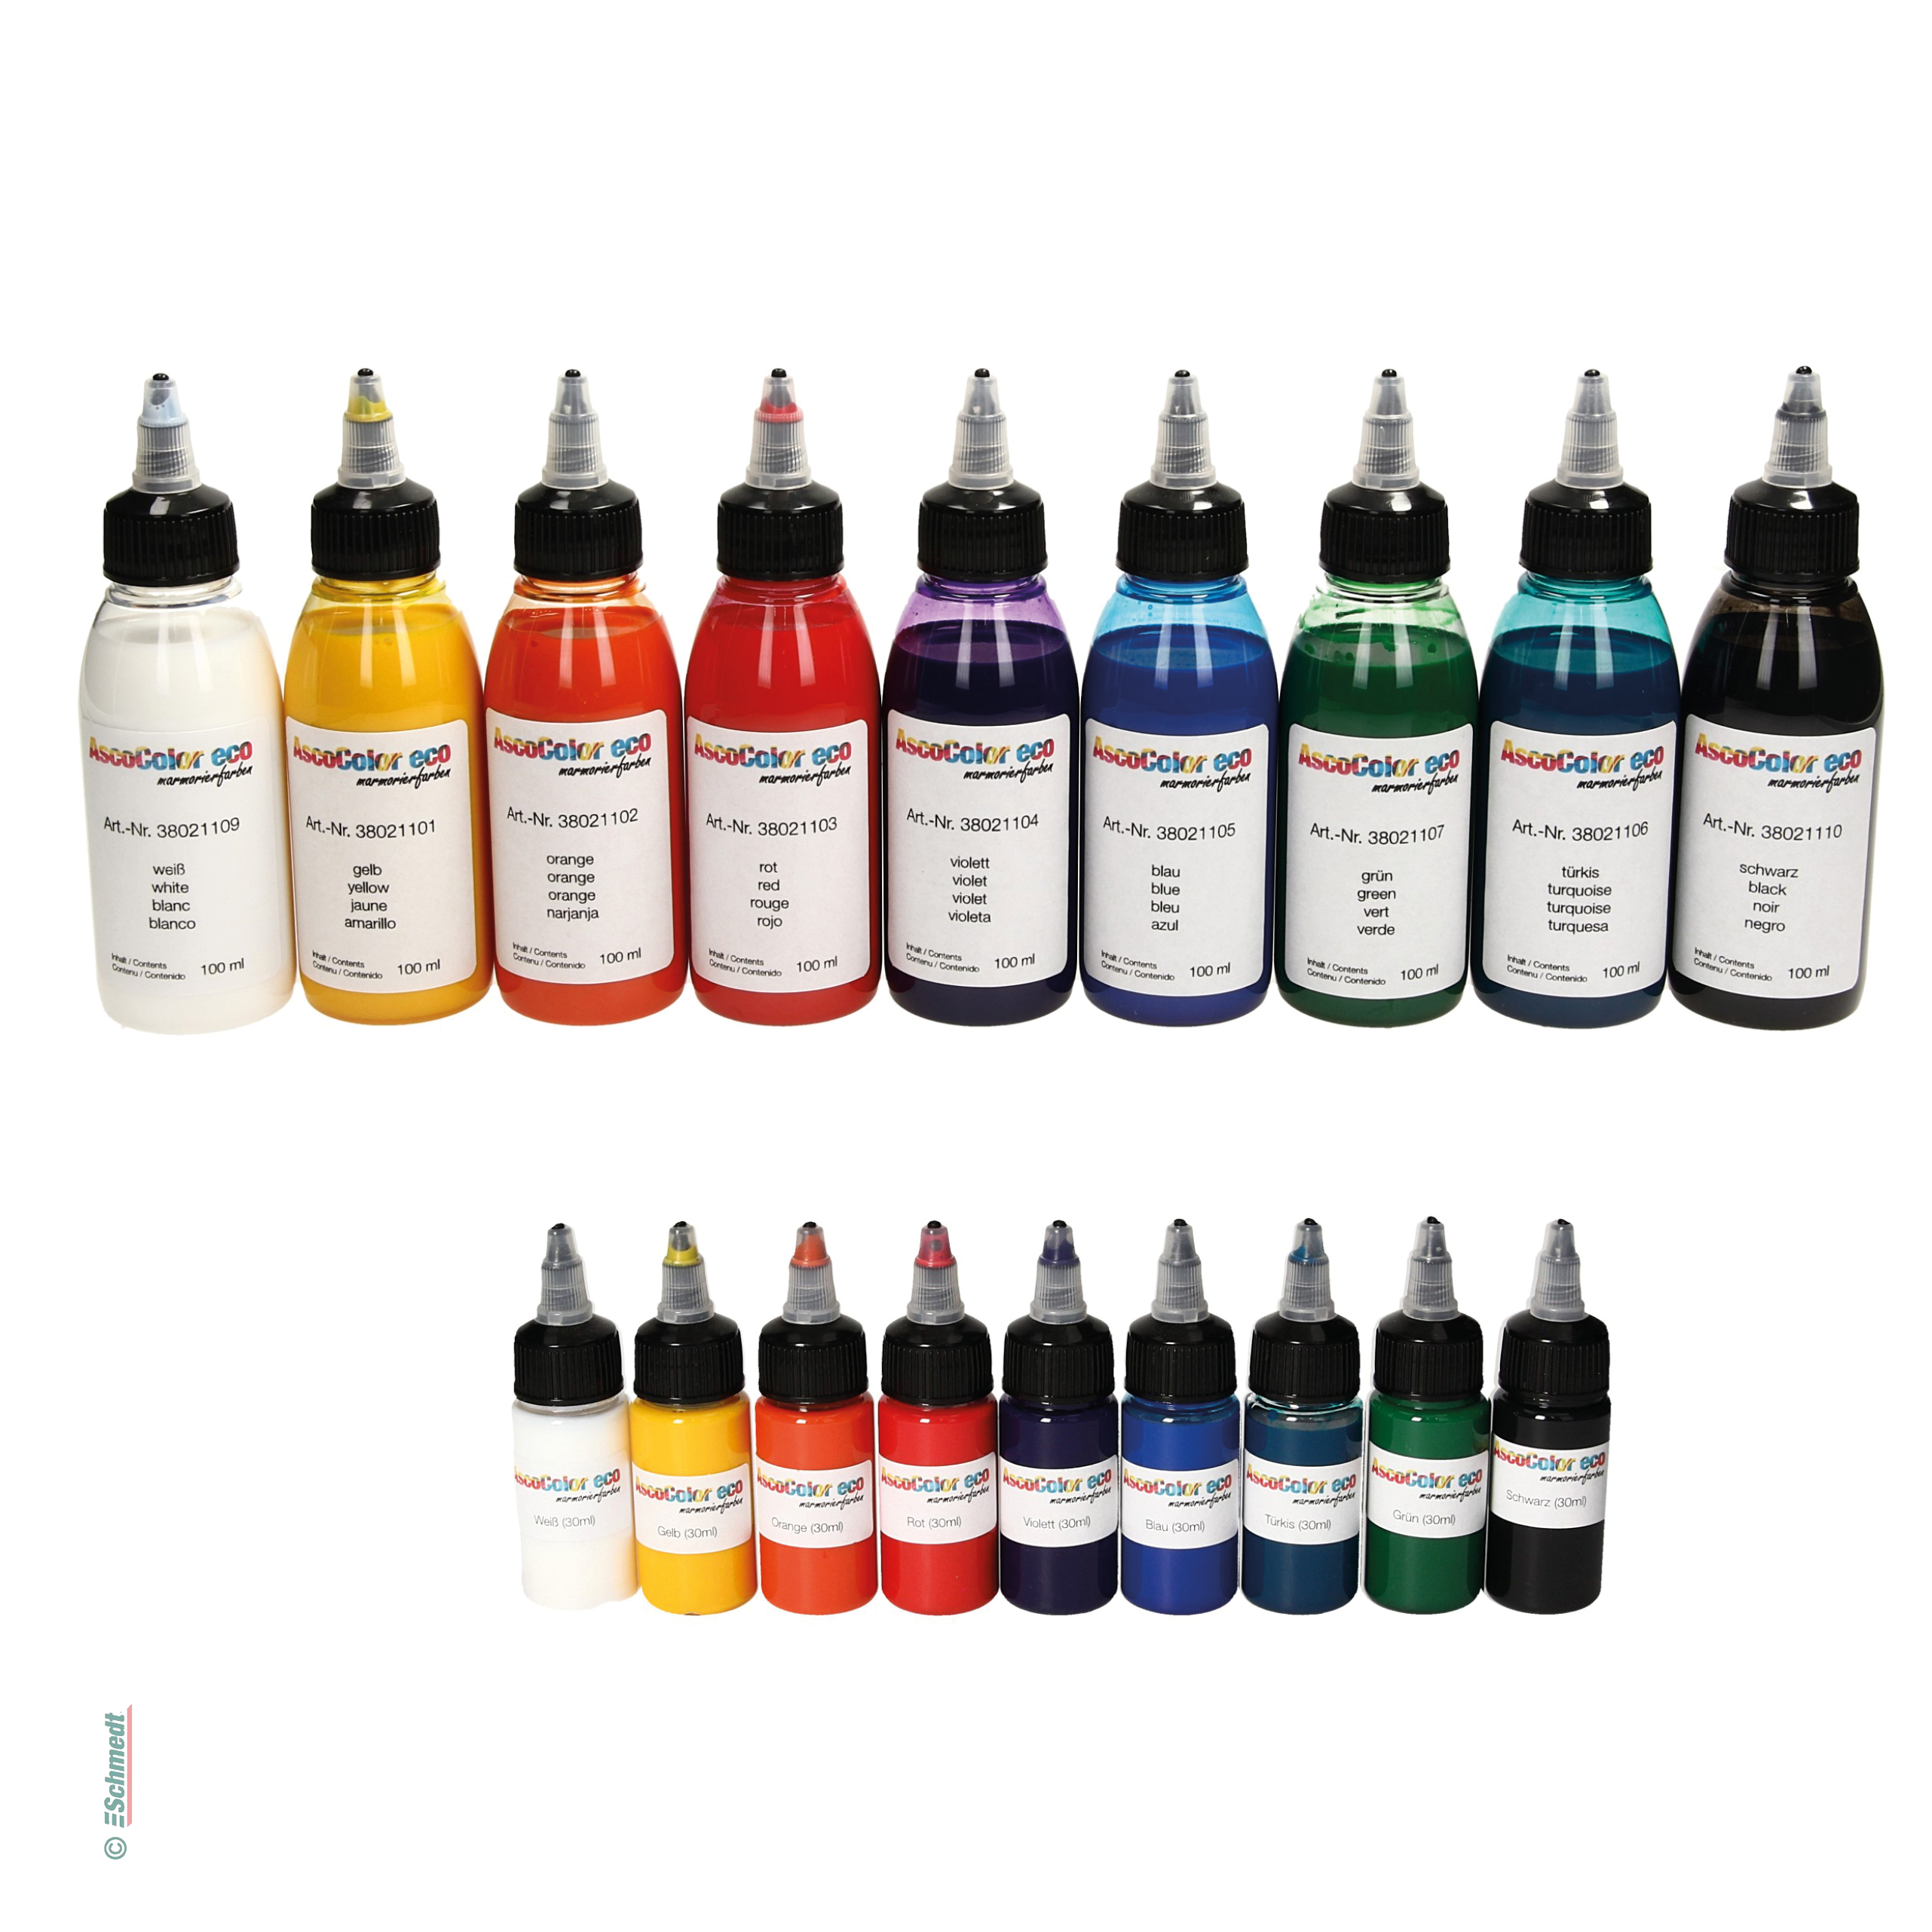 AscoColor eco - Marbling dye - Colour 105 - blue - Contents Bottle / 100 ml - to produce marbled papers...